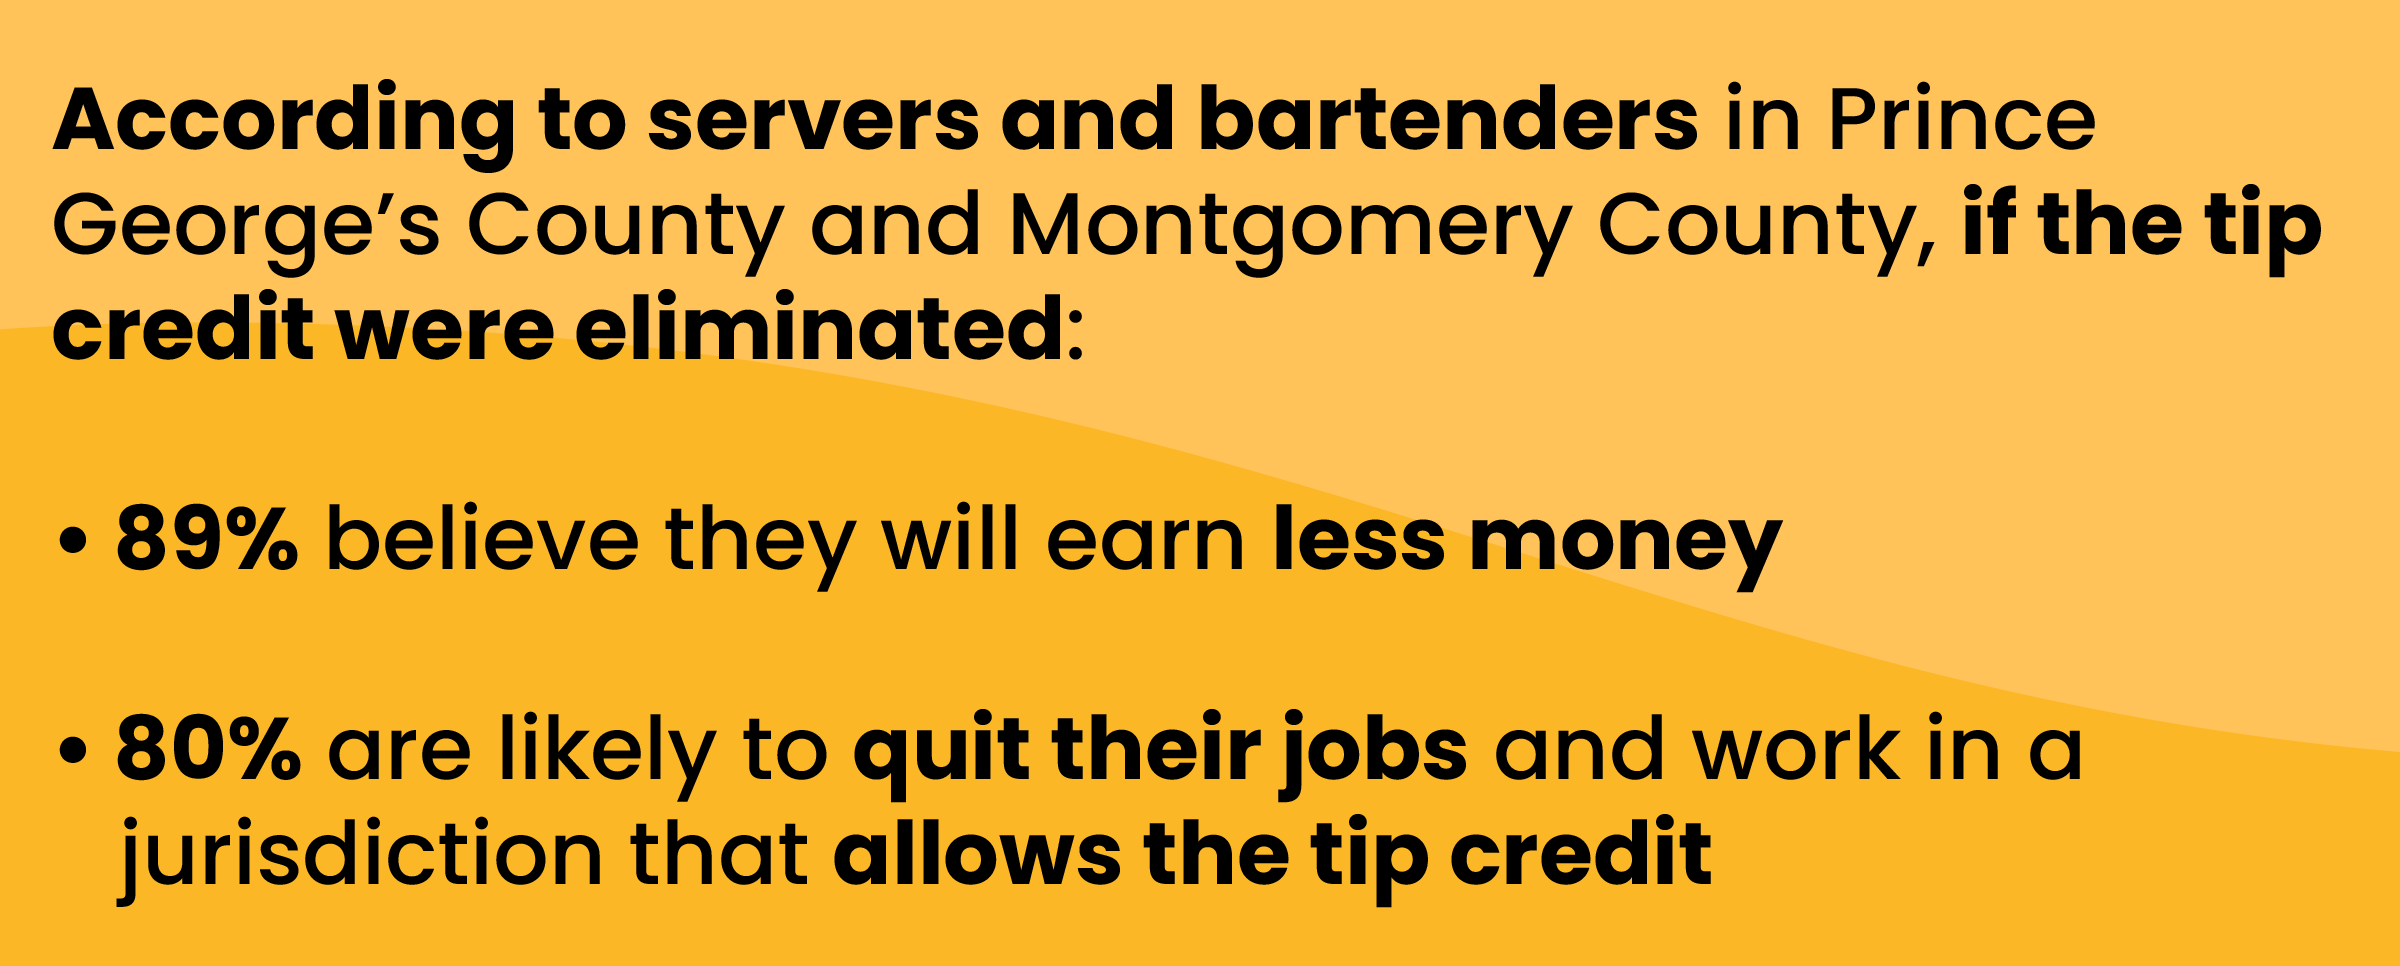 Infographic image in support of tipped credit workers